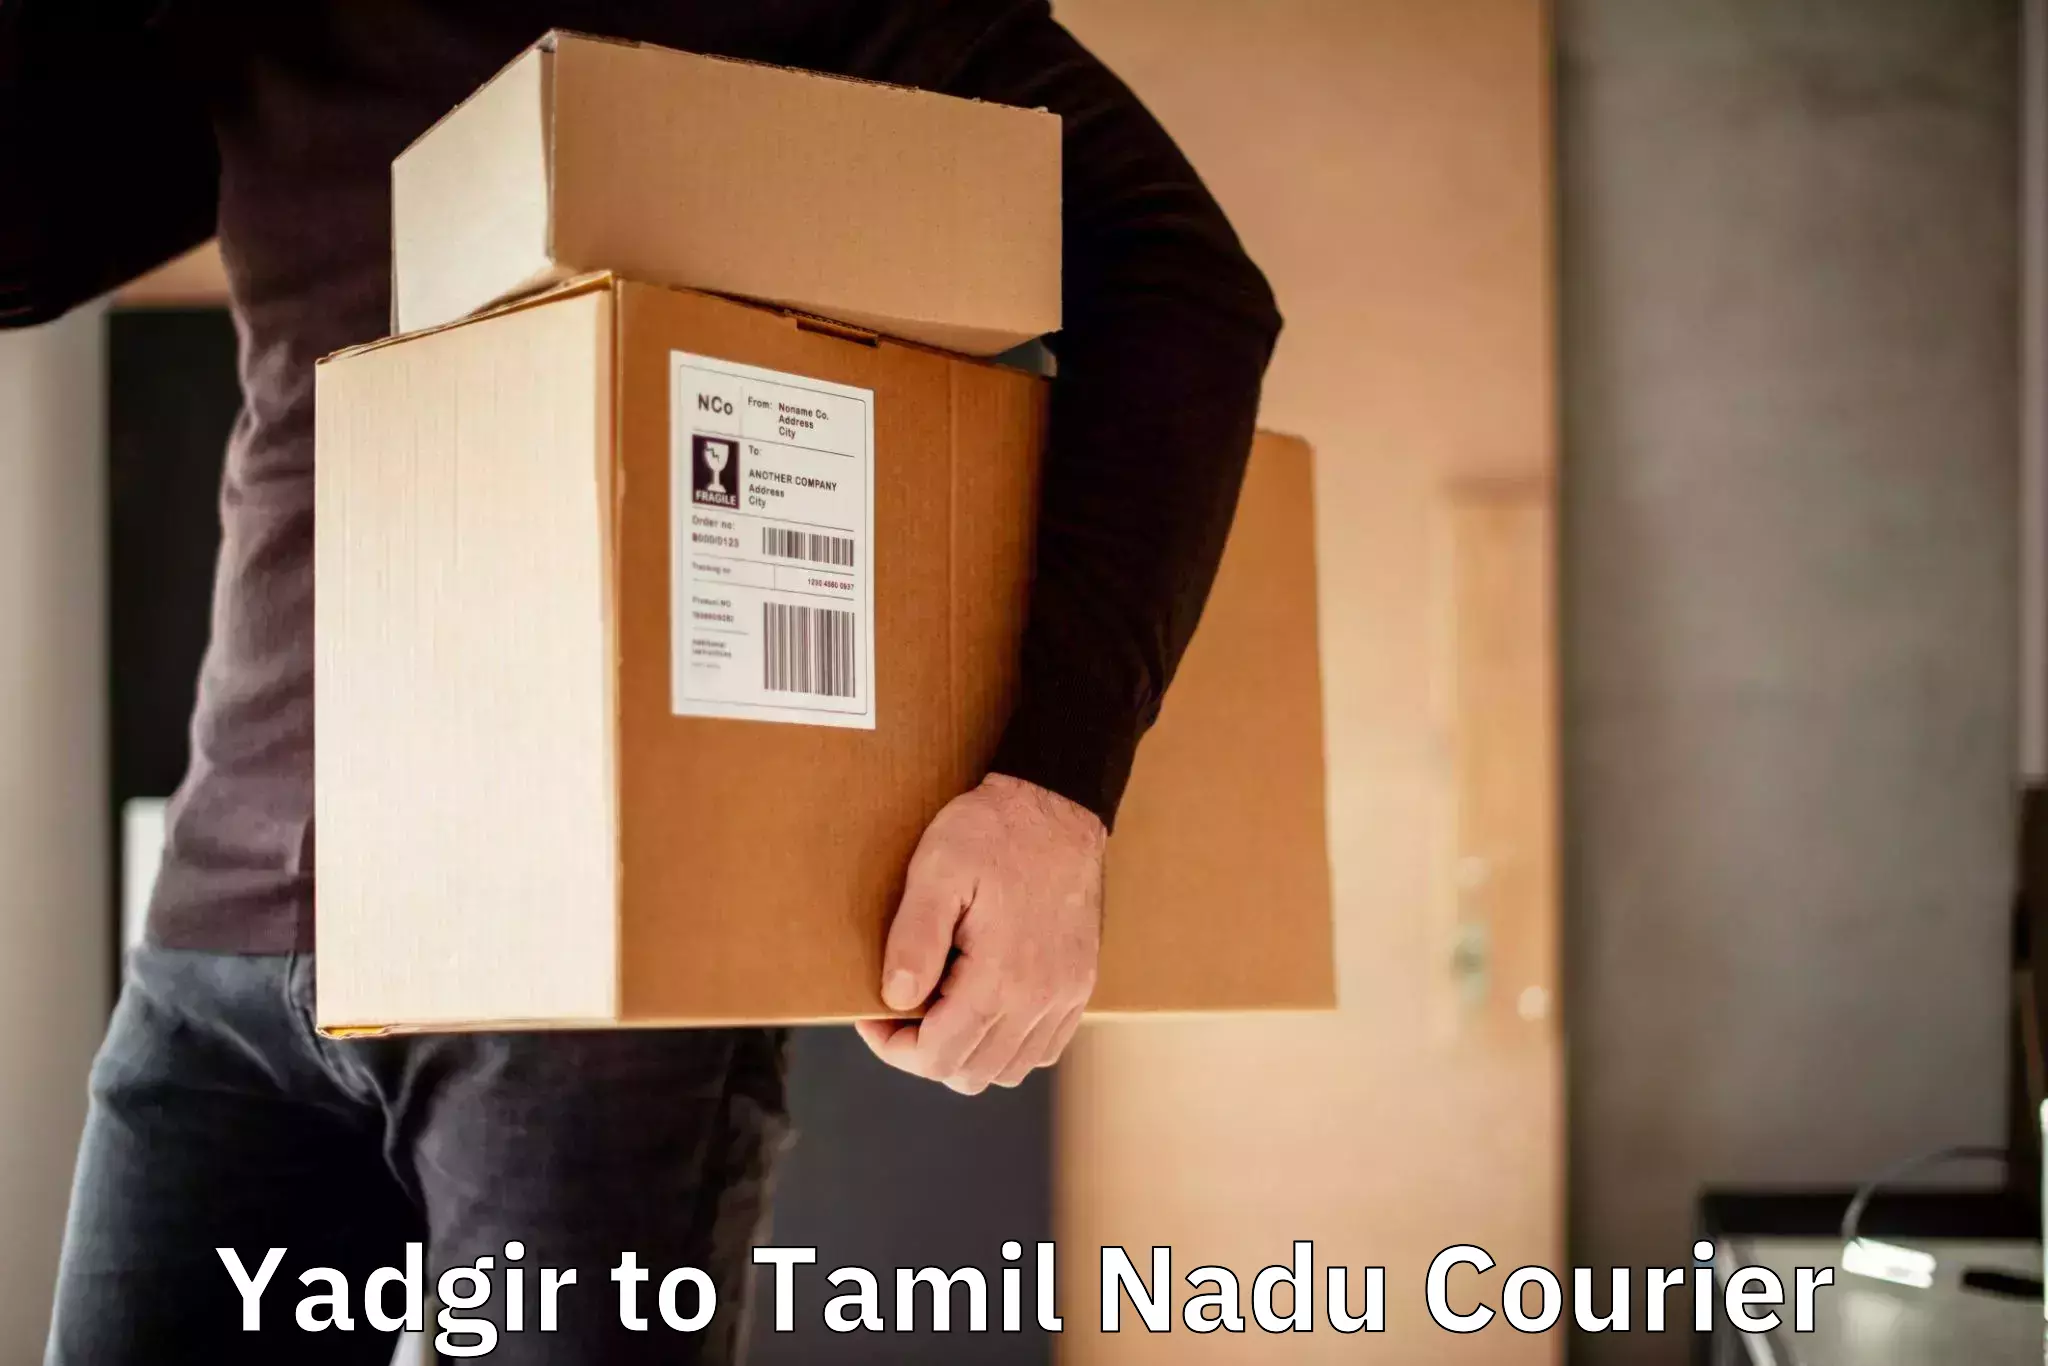 State-of-the-art courier technology Yadgir to Oddanchatram